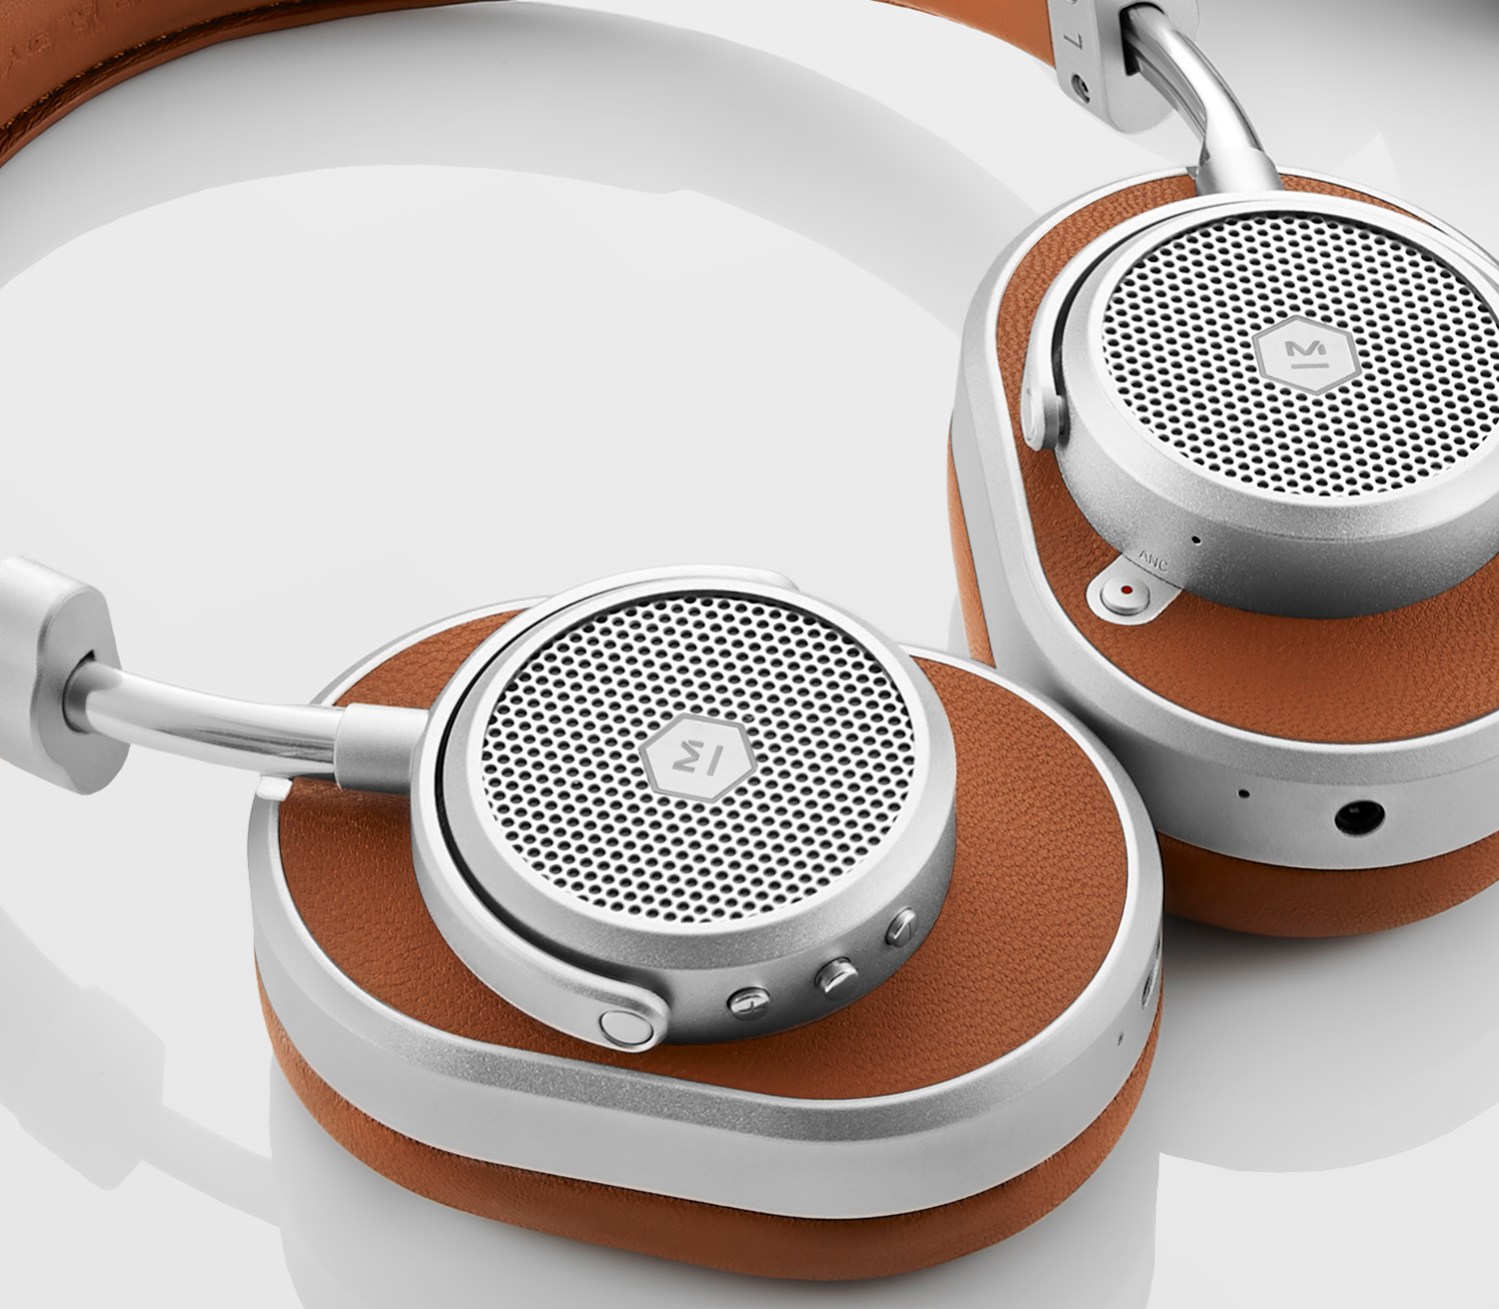 Our active noise-cancelling system eliminates noise without compromising sound quality